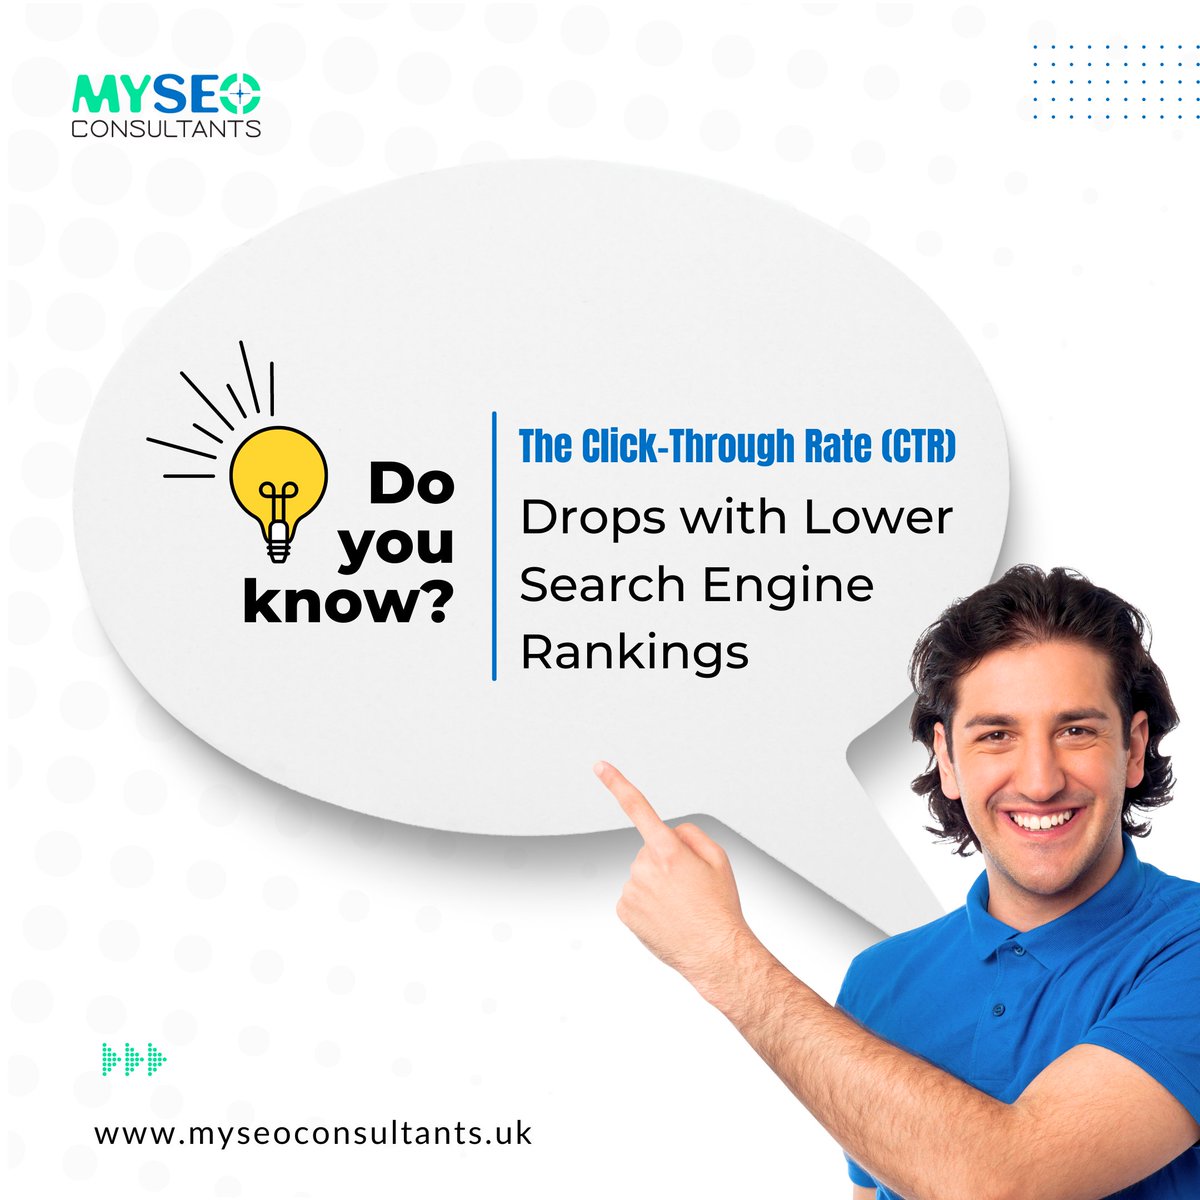 Unlock the SEO Secret: As your search engine ranking drops, so does your Click-Through Rate (CTR)!
📉 Maximize visibility and watch your CTR soar for digital success. 🔝

Follow us for more facts

#seo2024 #seo #staffordshire #MaximizeVisibility #CTR #digitalmarketing #london